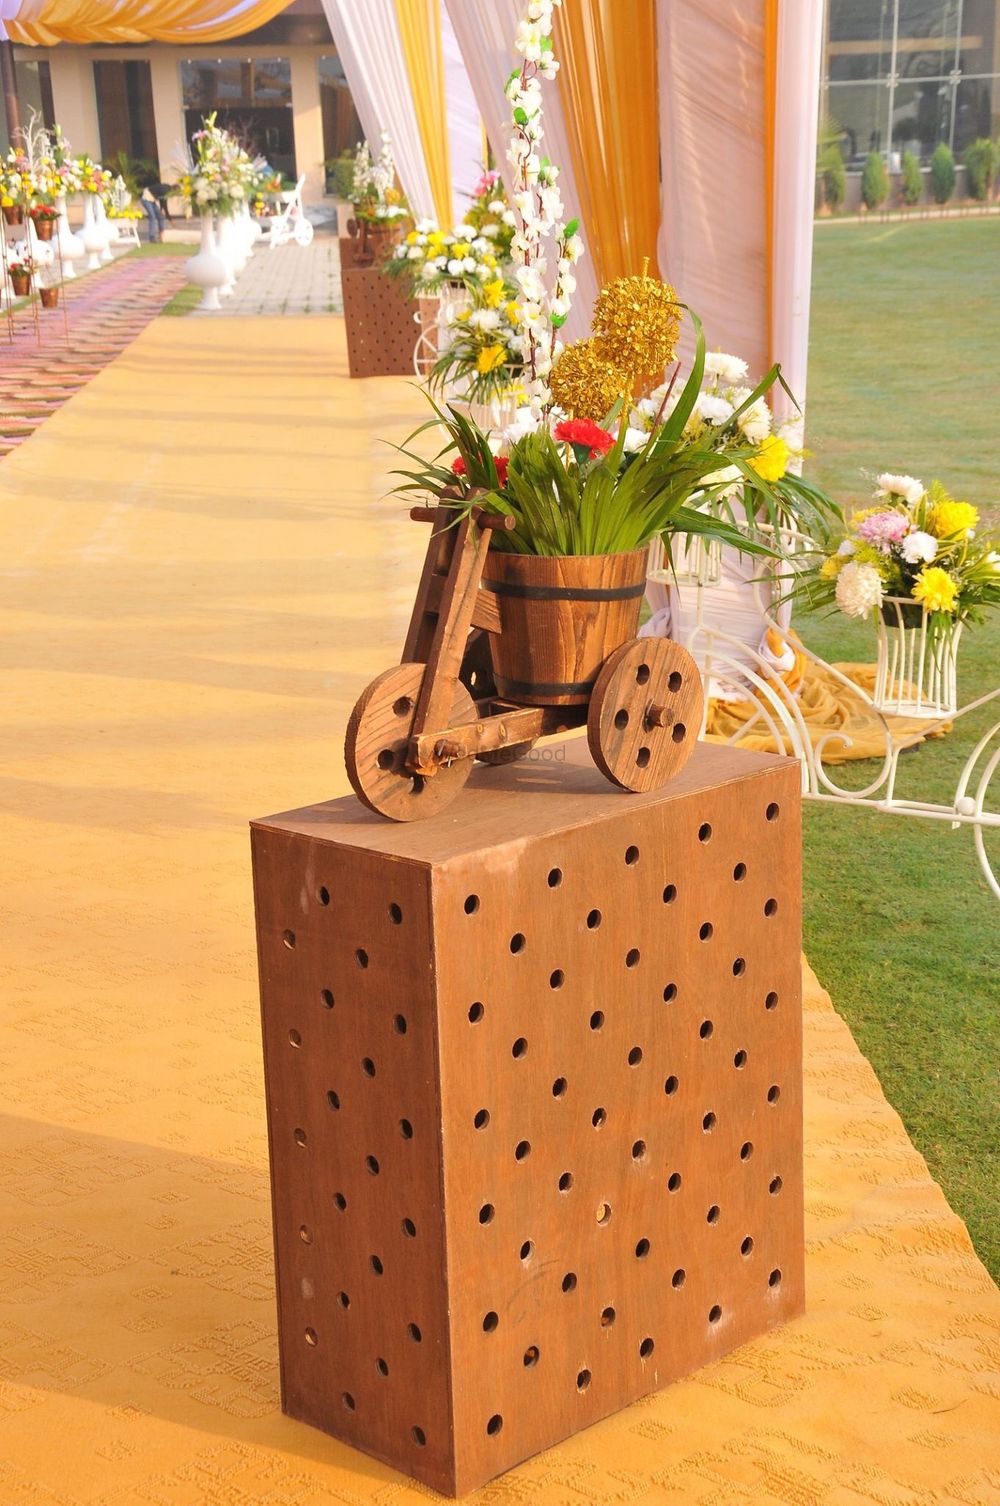 Photo of wooden cycle and box entrance decor